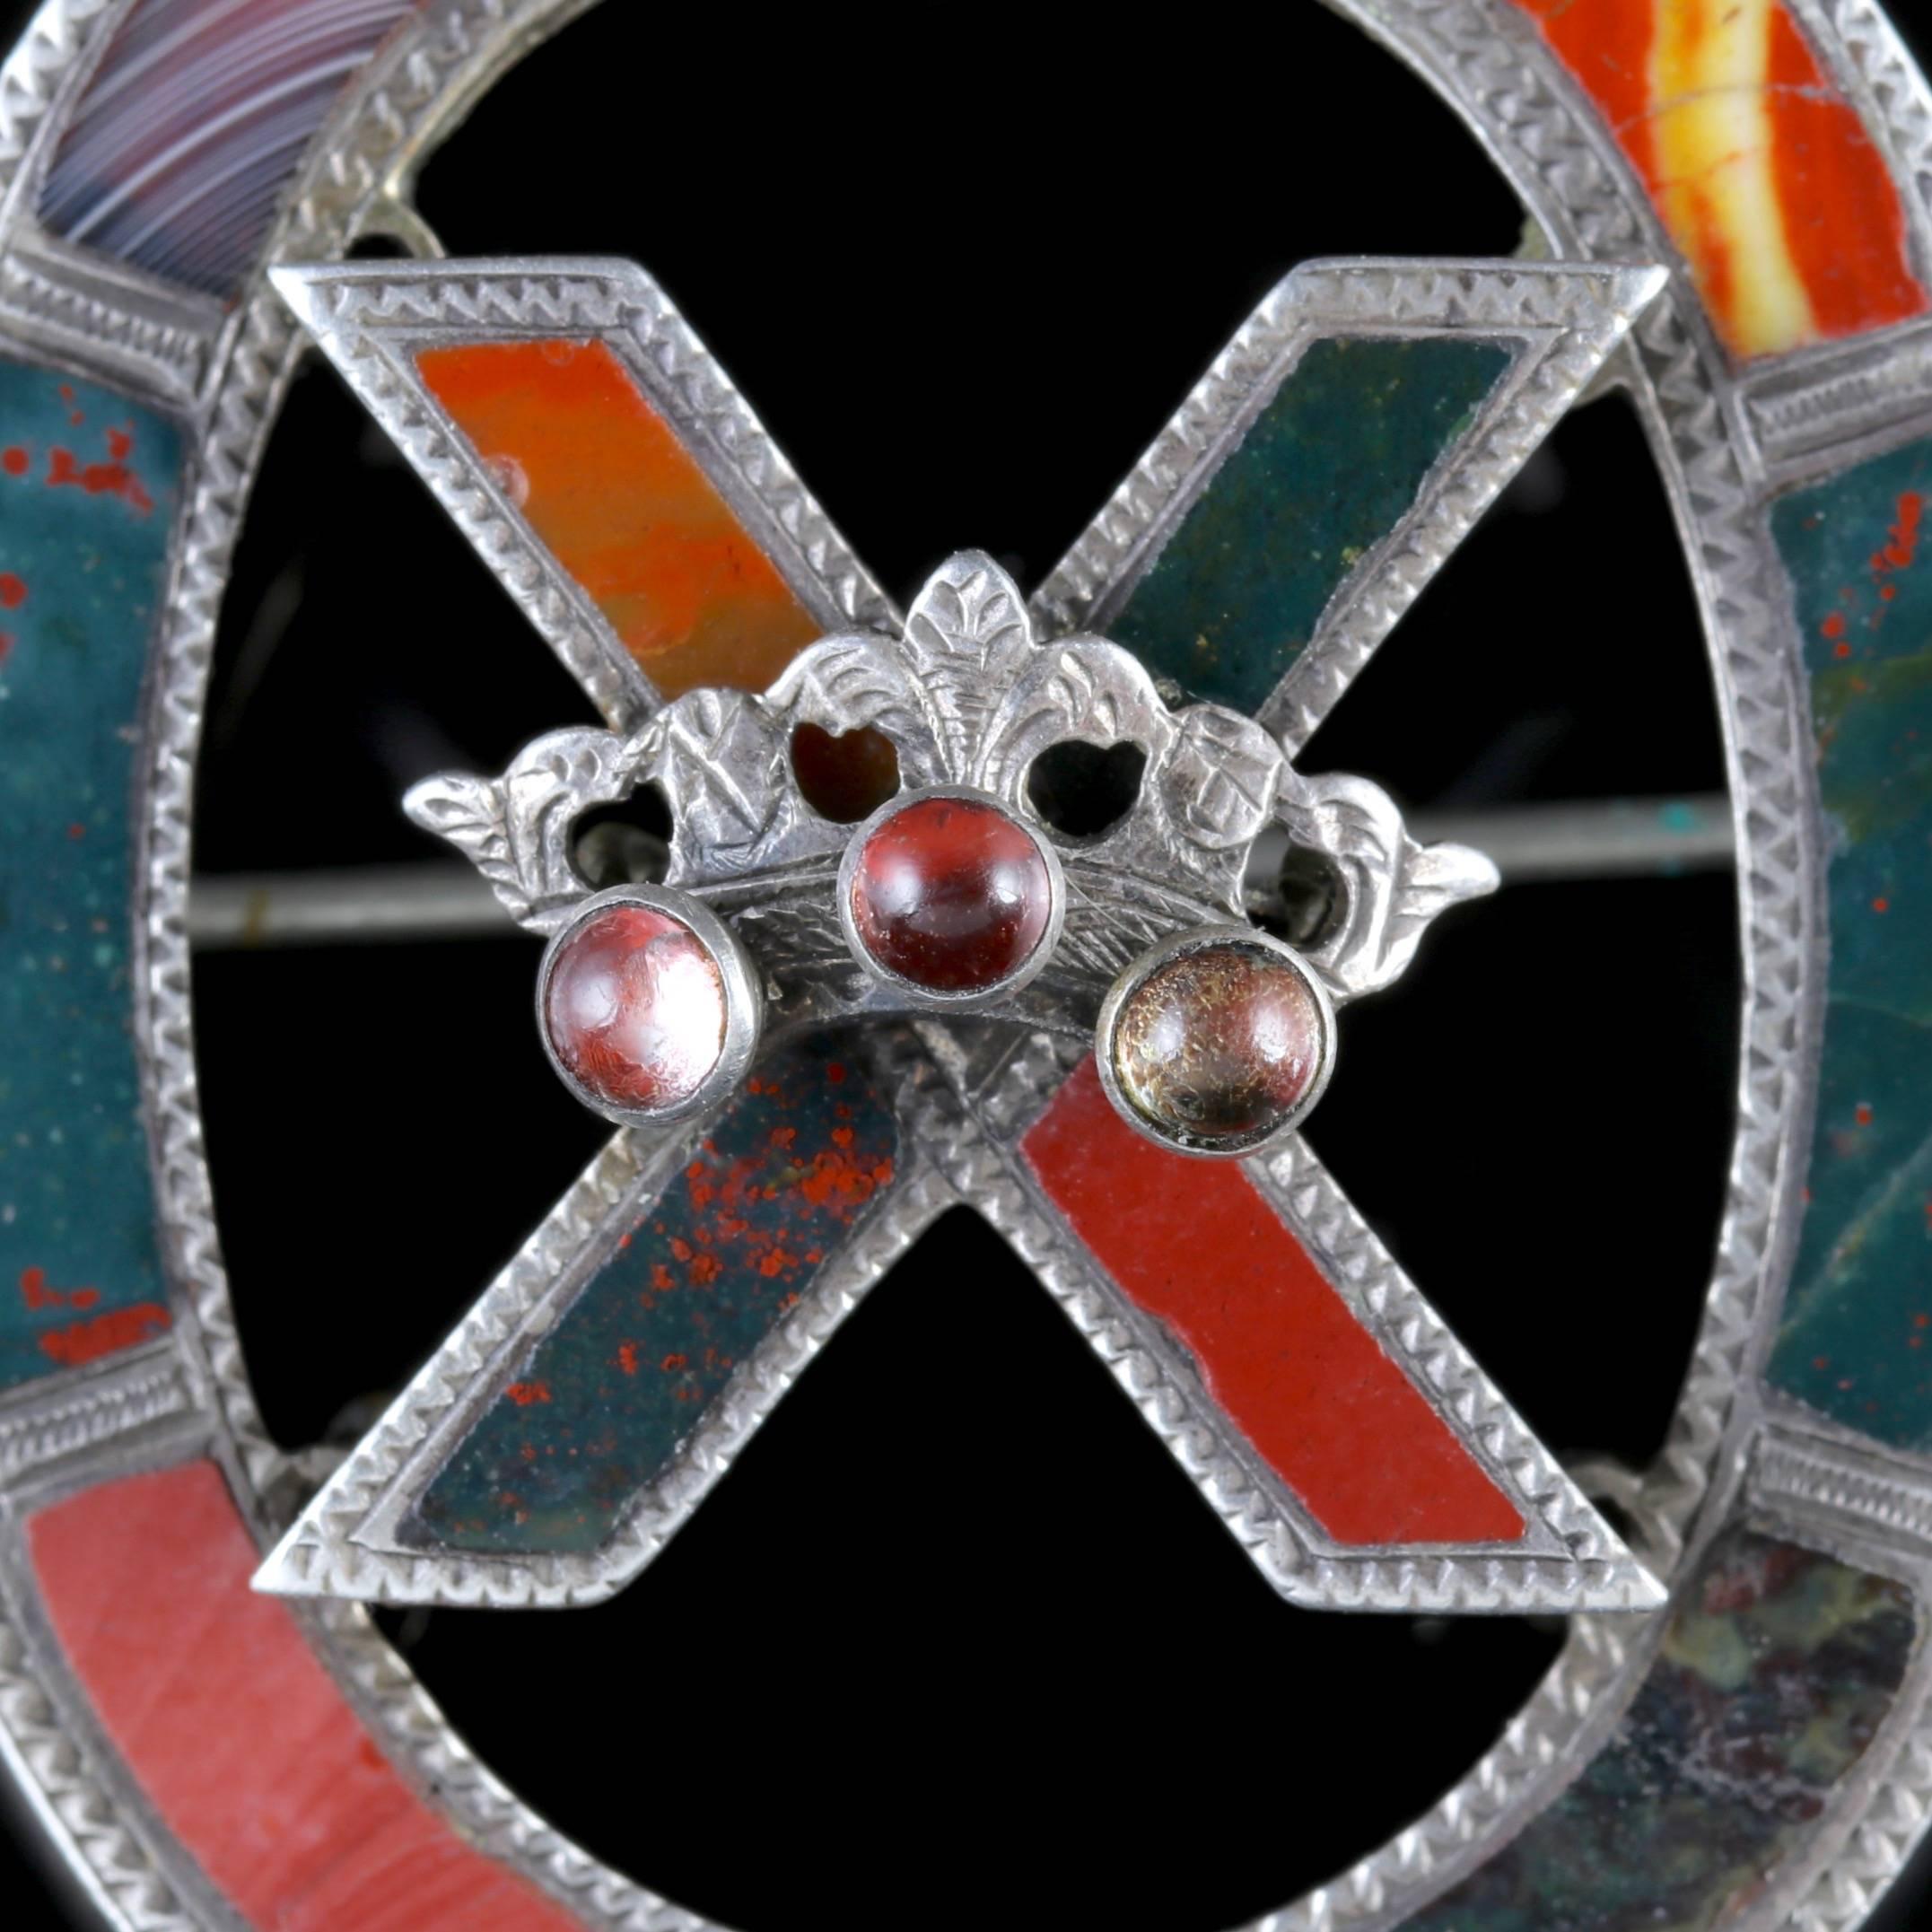 To read more please click continue reading below-

This fabulous antique Sterling Silver Scottish Agate brooch is genuine Victorian, Circa 1860.

Scottish jewellery was made popular by Queen Victoria as it became a souvenir of her trips to Scotland.